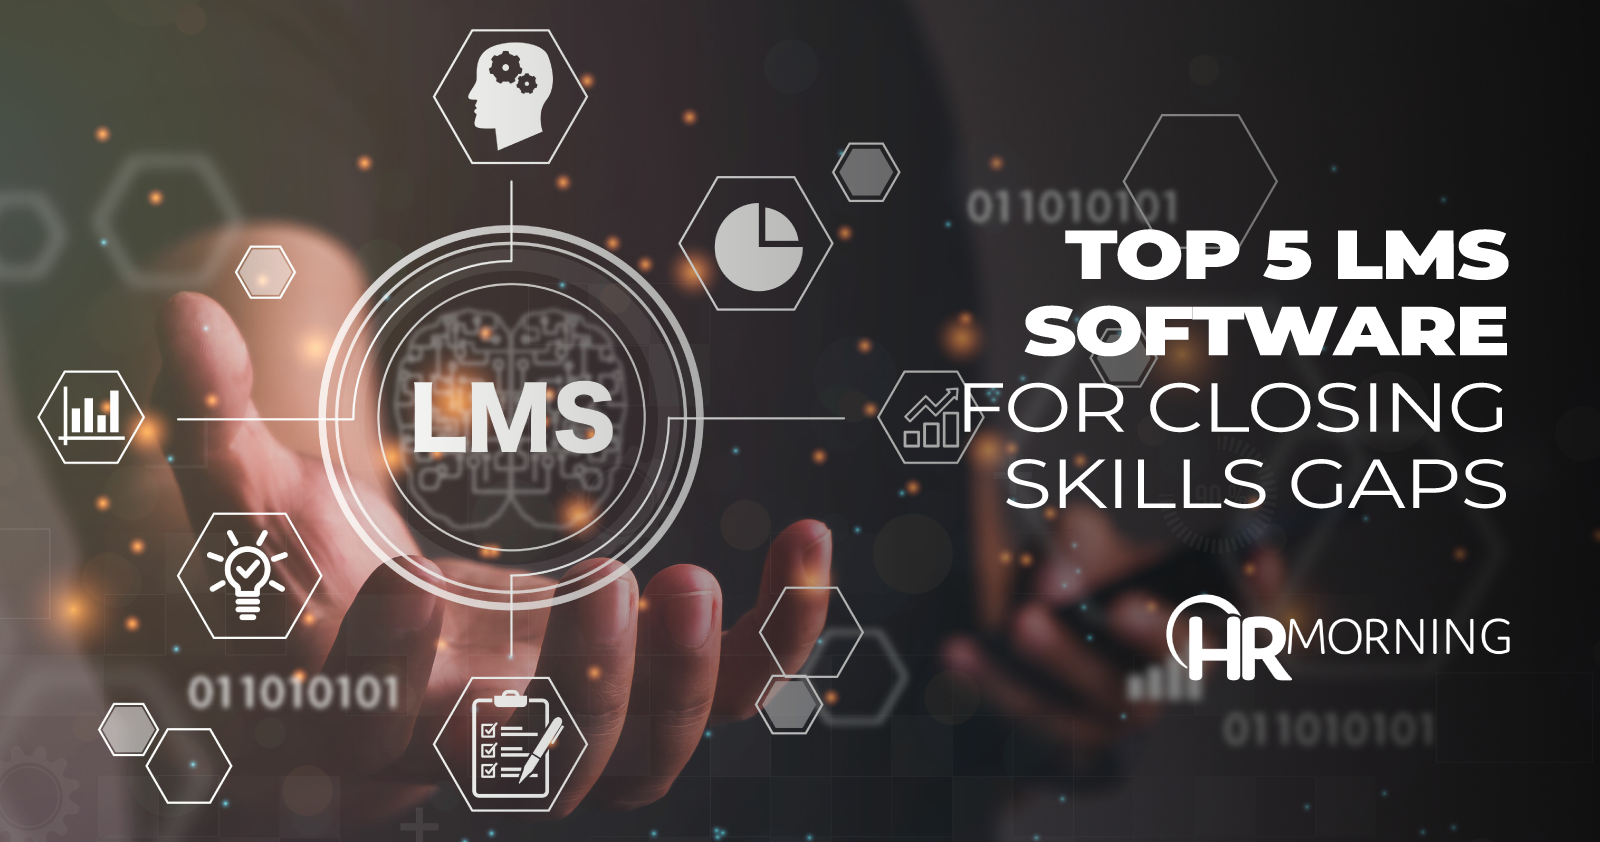 Top 5 LMS Software for Closing Skills Gaps